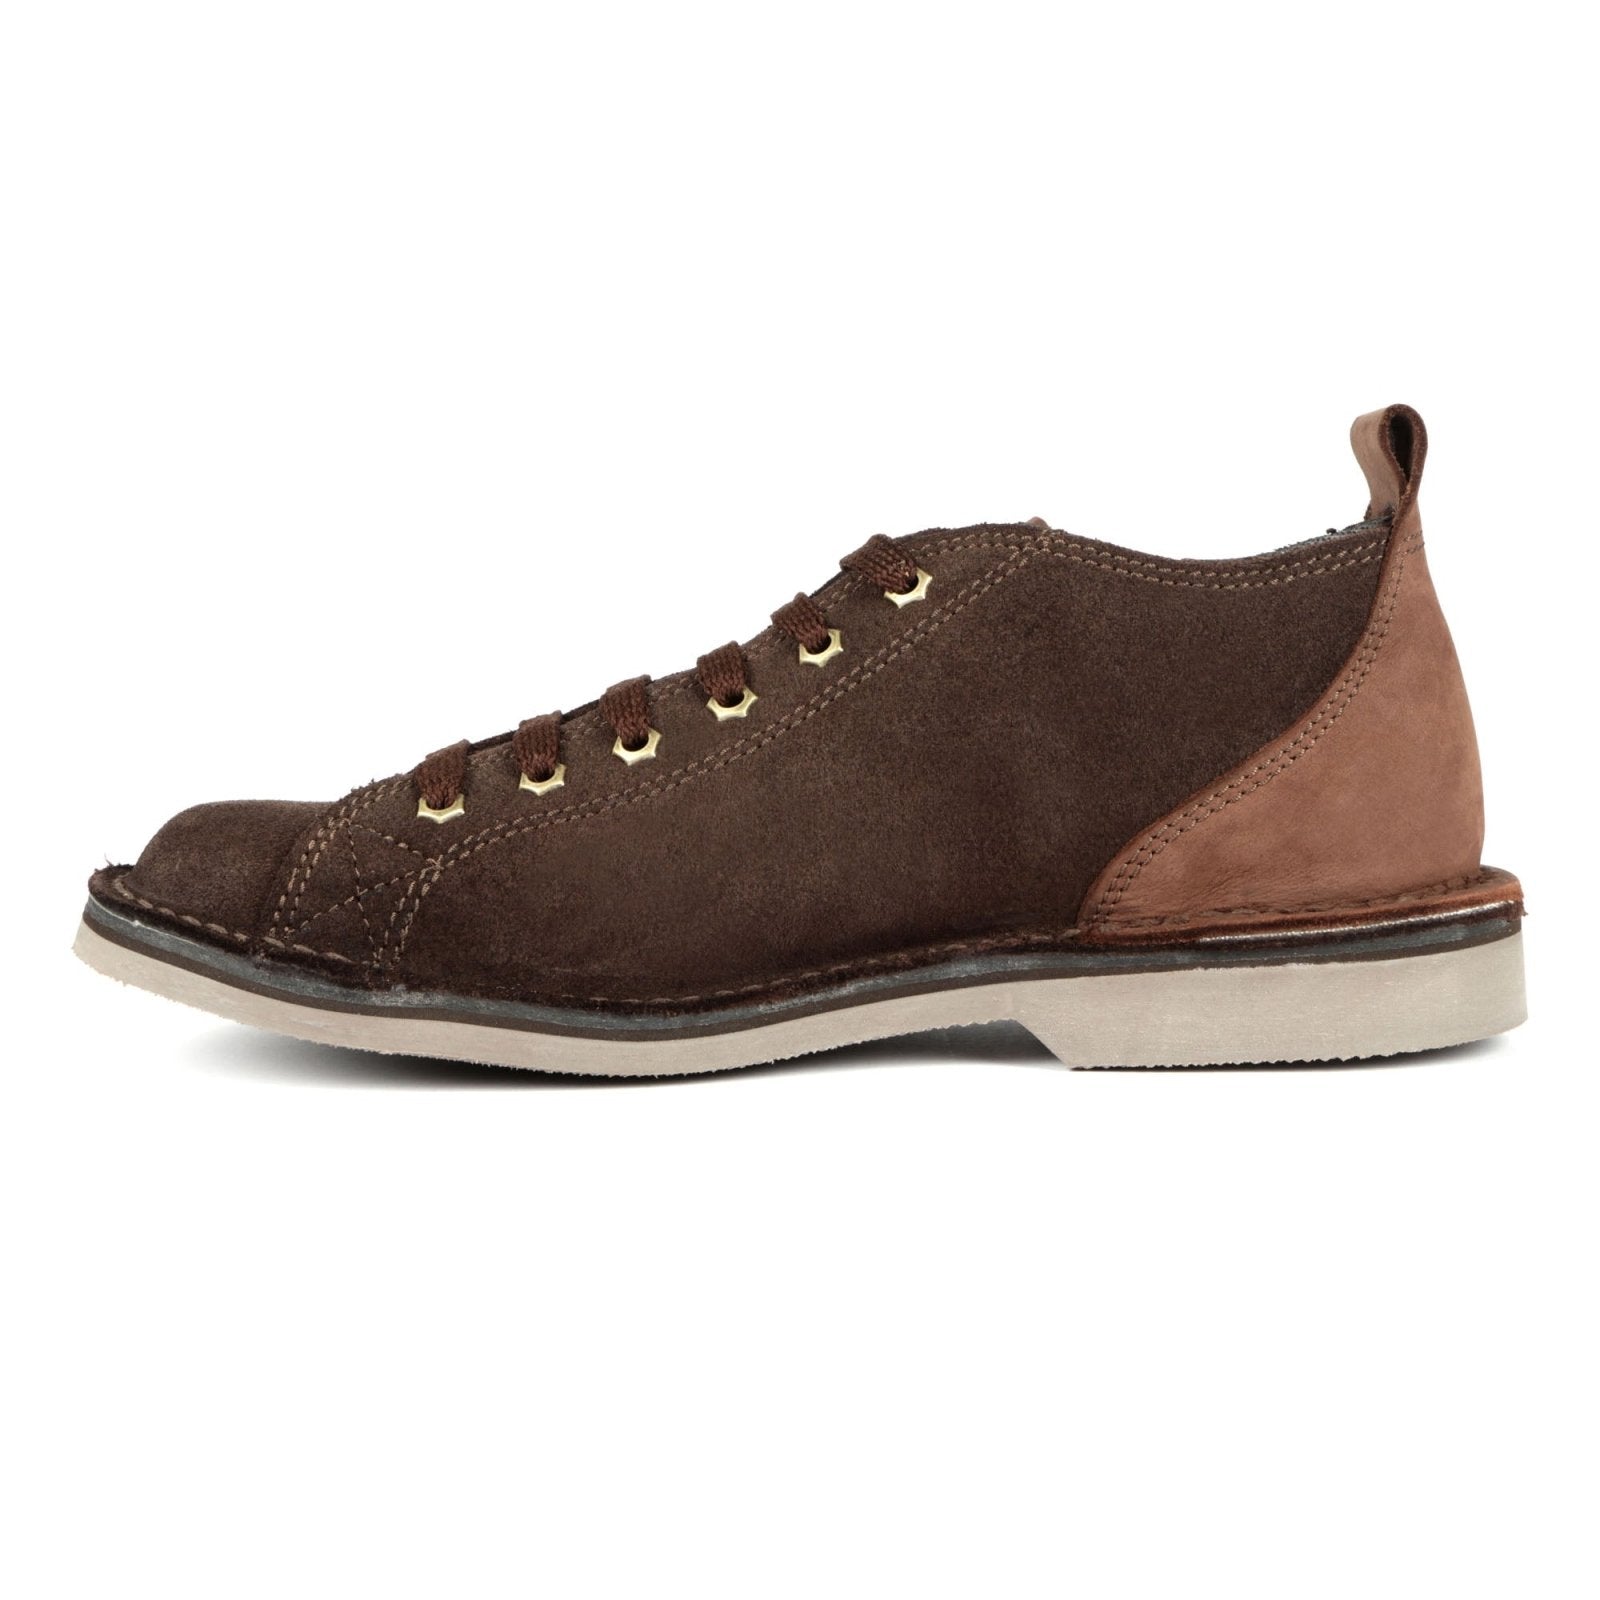 Alexander Premium Suede leather Takkie Veldskoen - Freestyle SA Proudly local leather boots veldskoens vellies leather shoes suede veldskoens